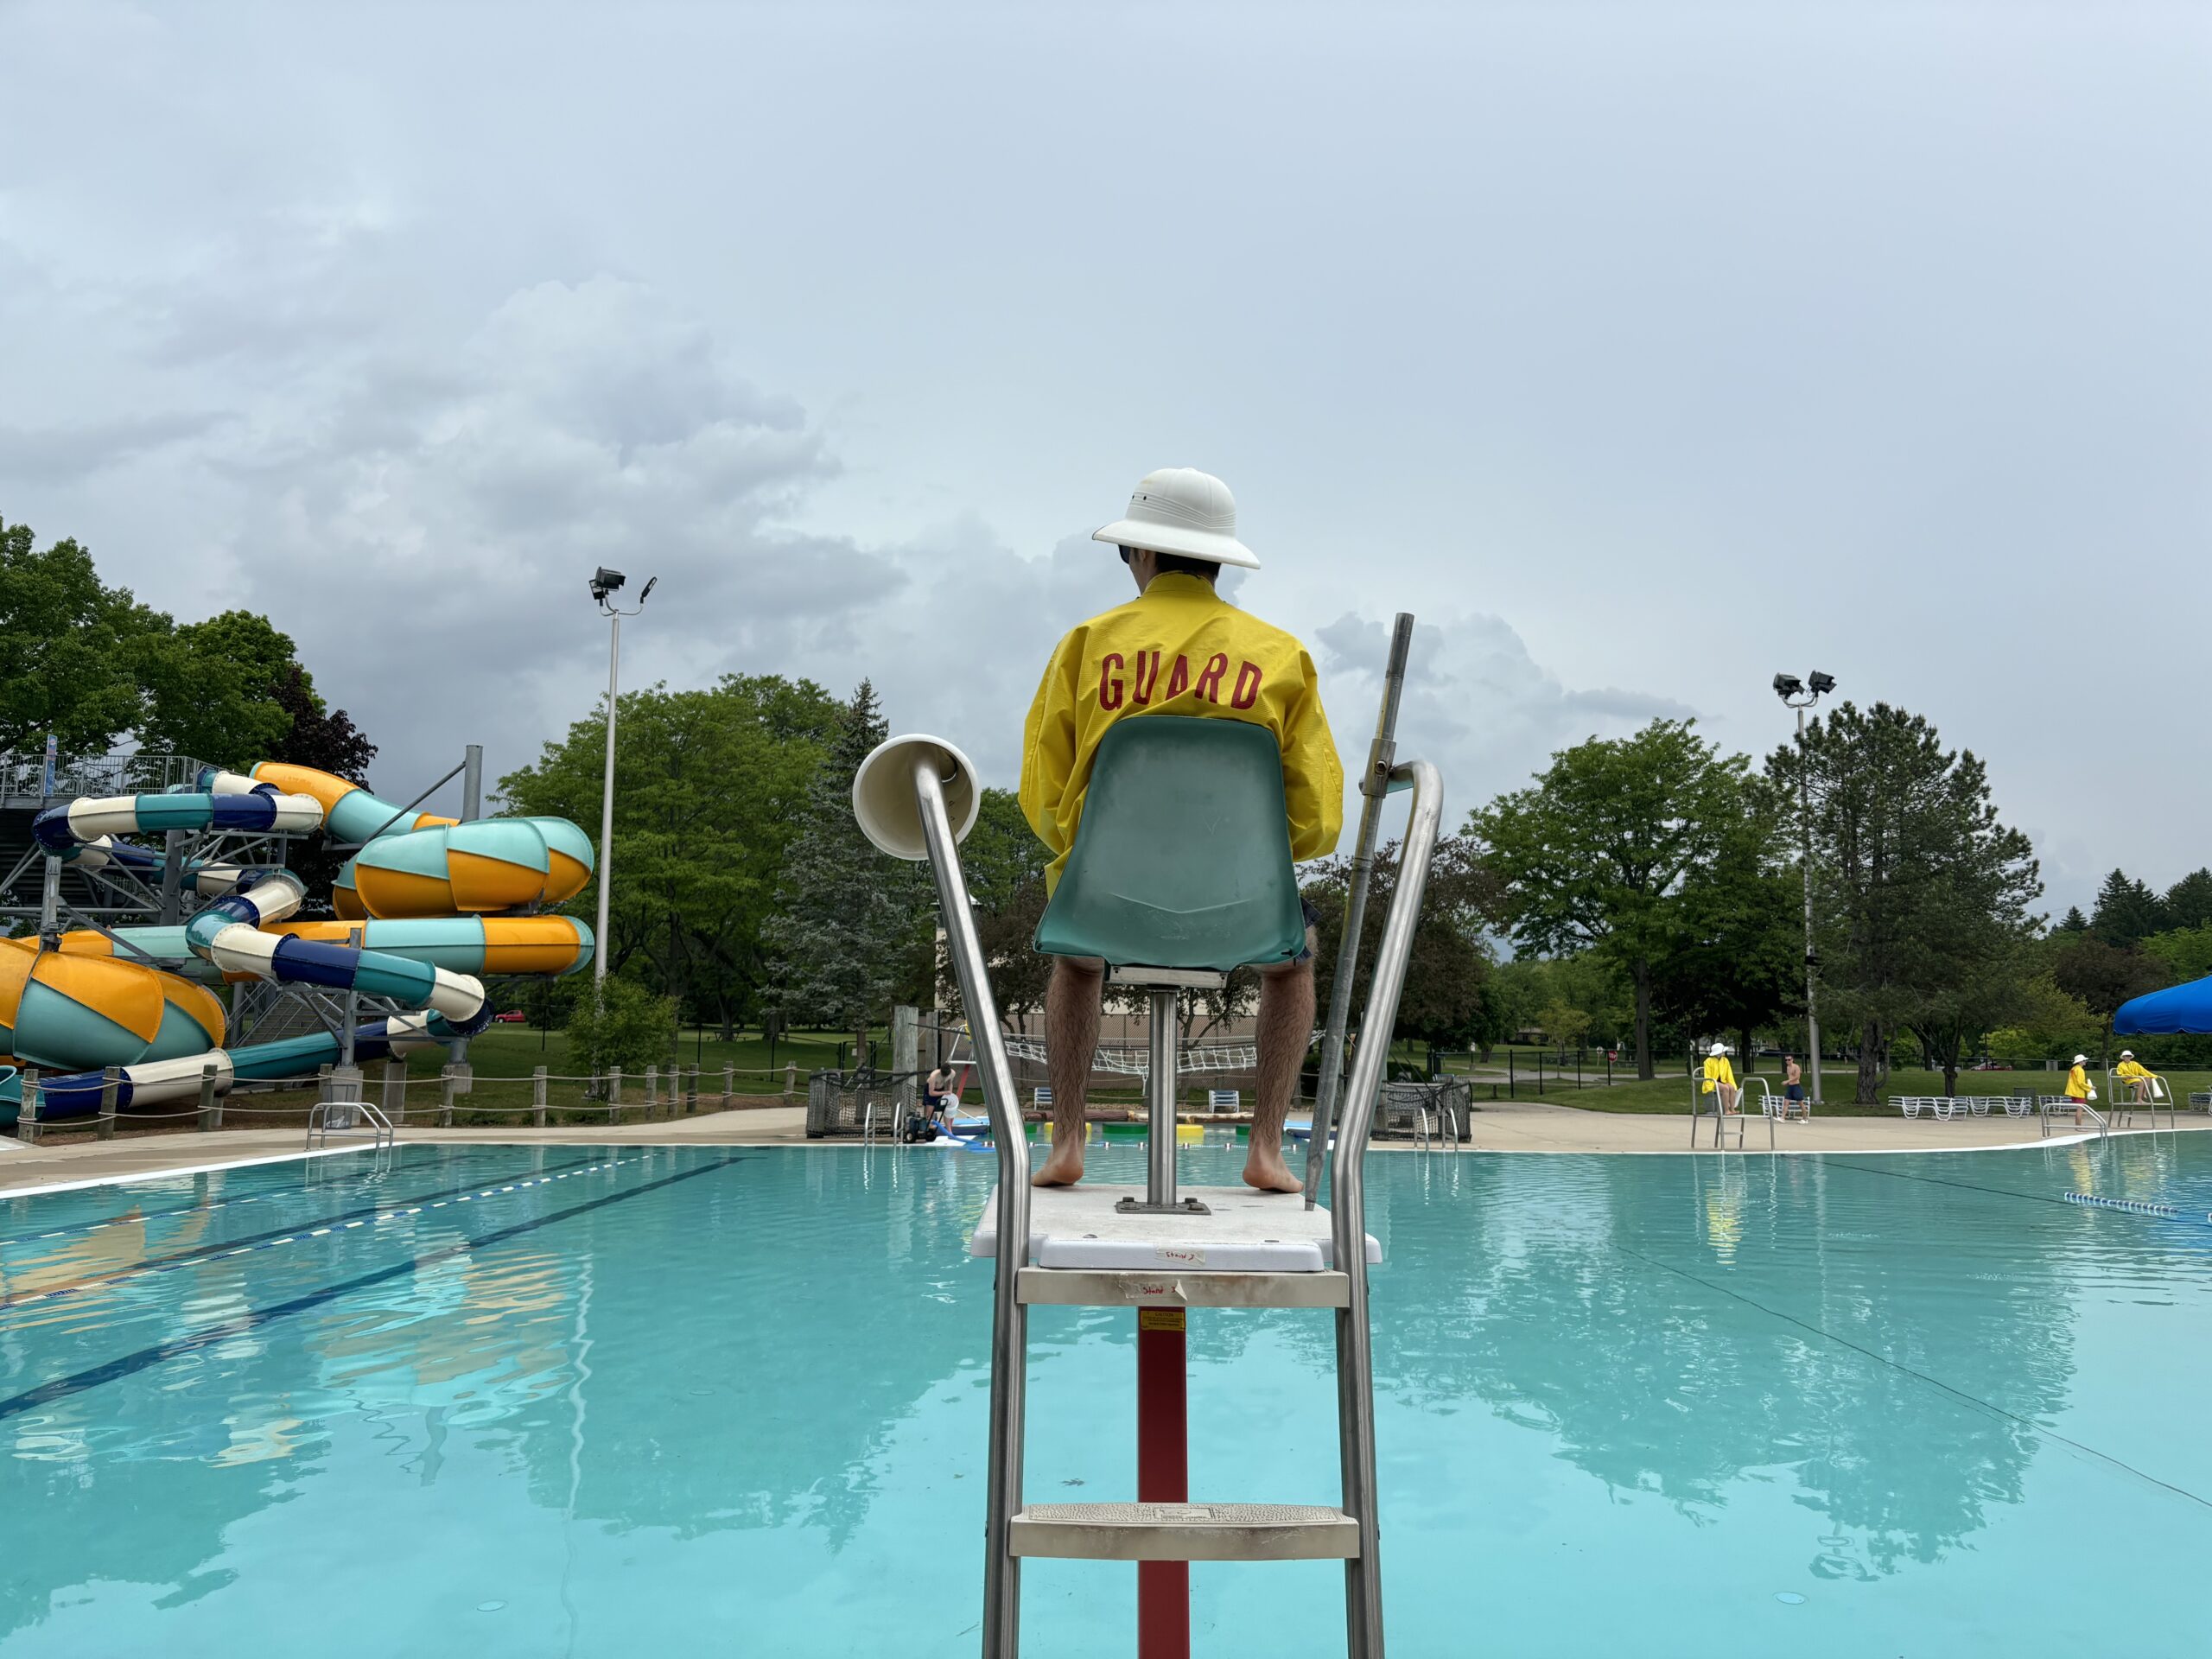 COVID caused a lifeguard shortage. Some pools are still recovering.